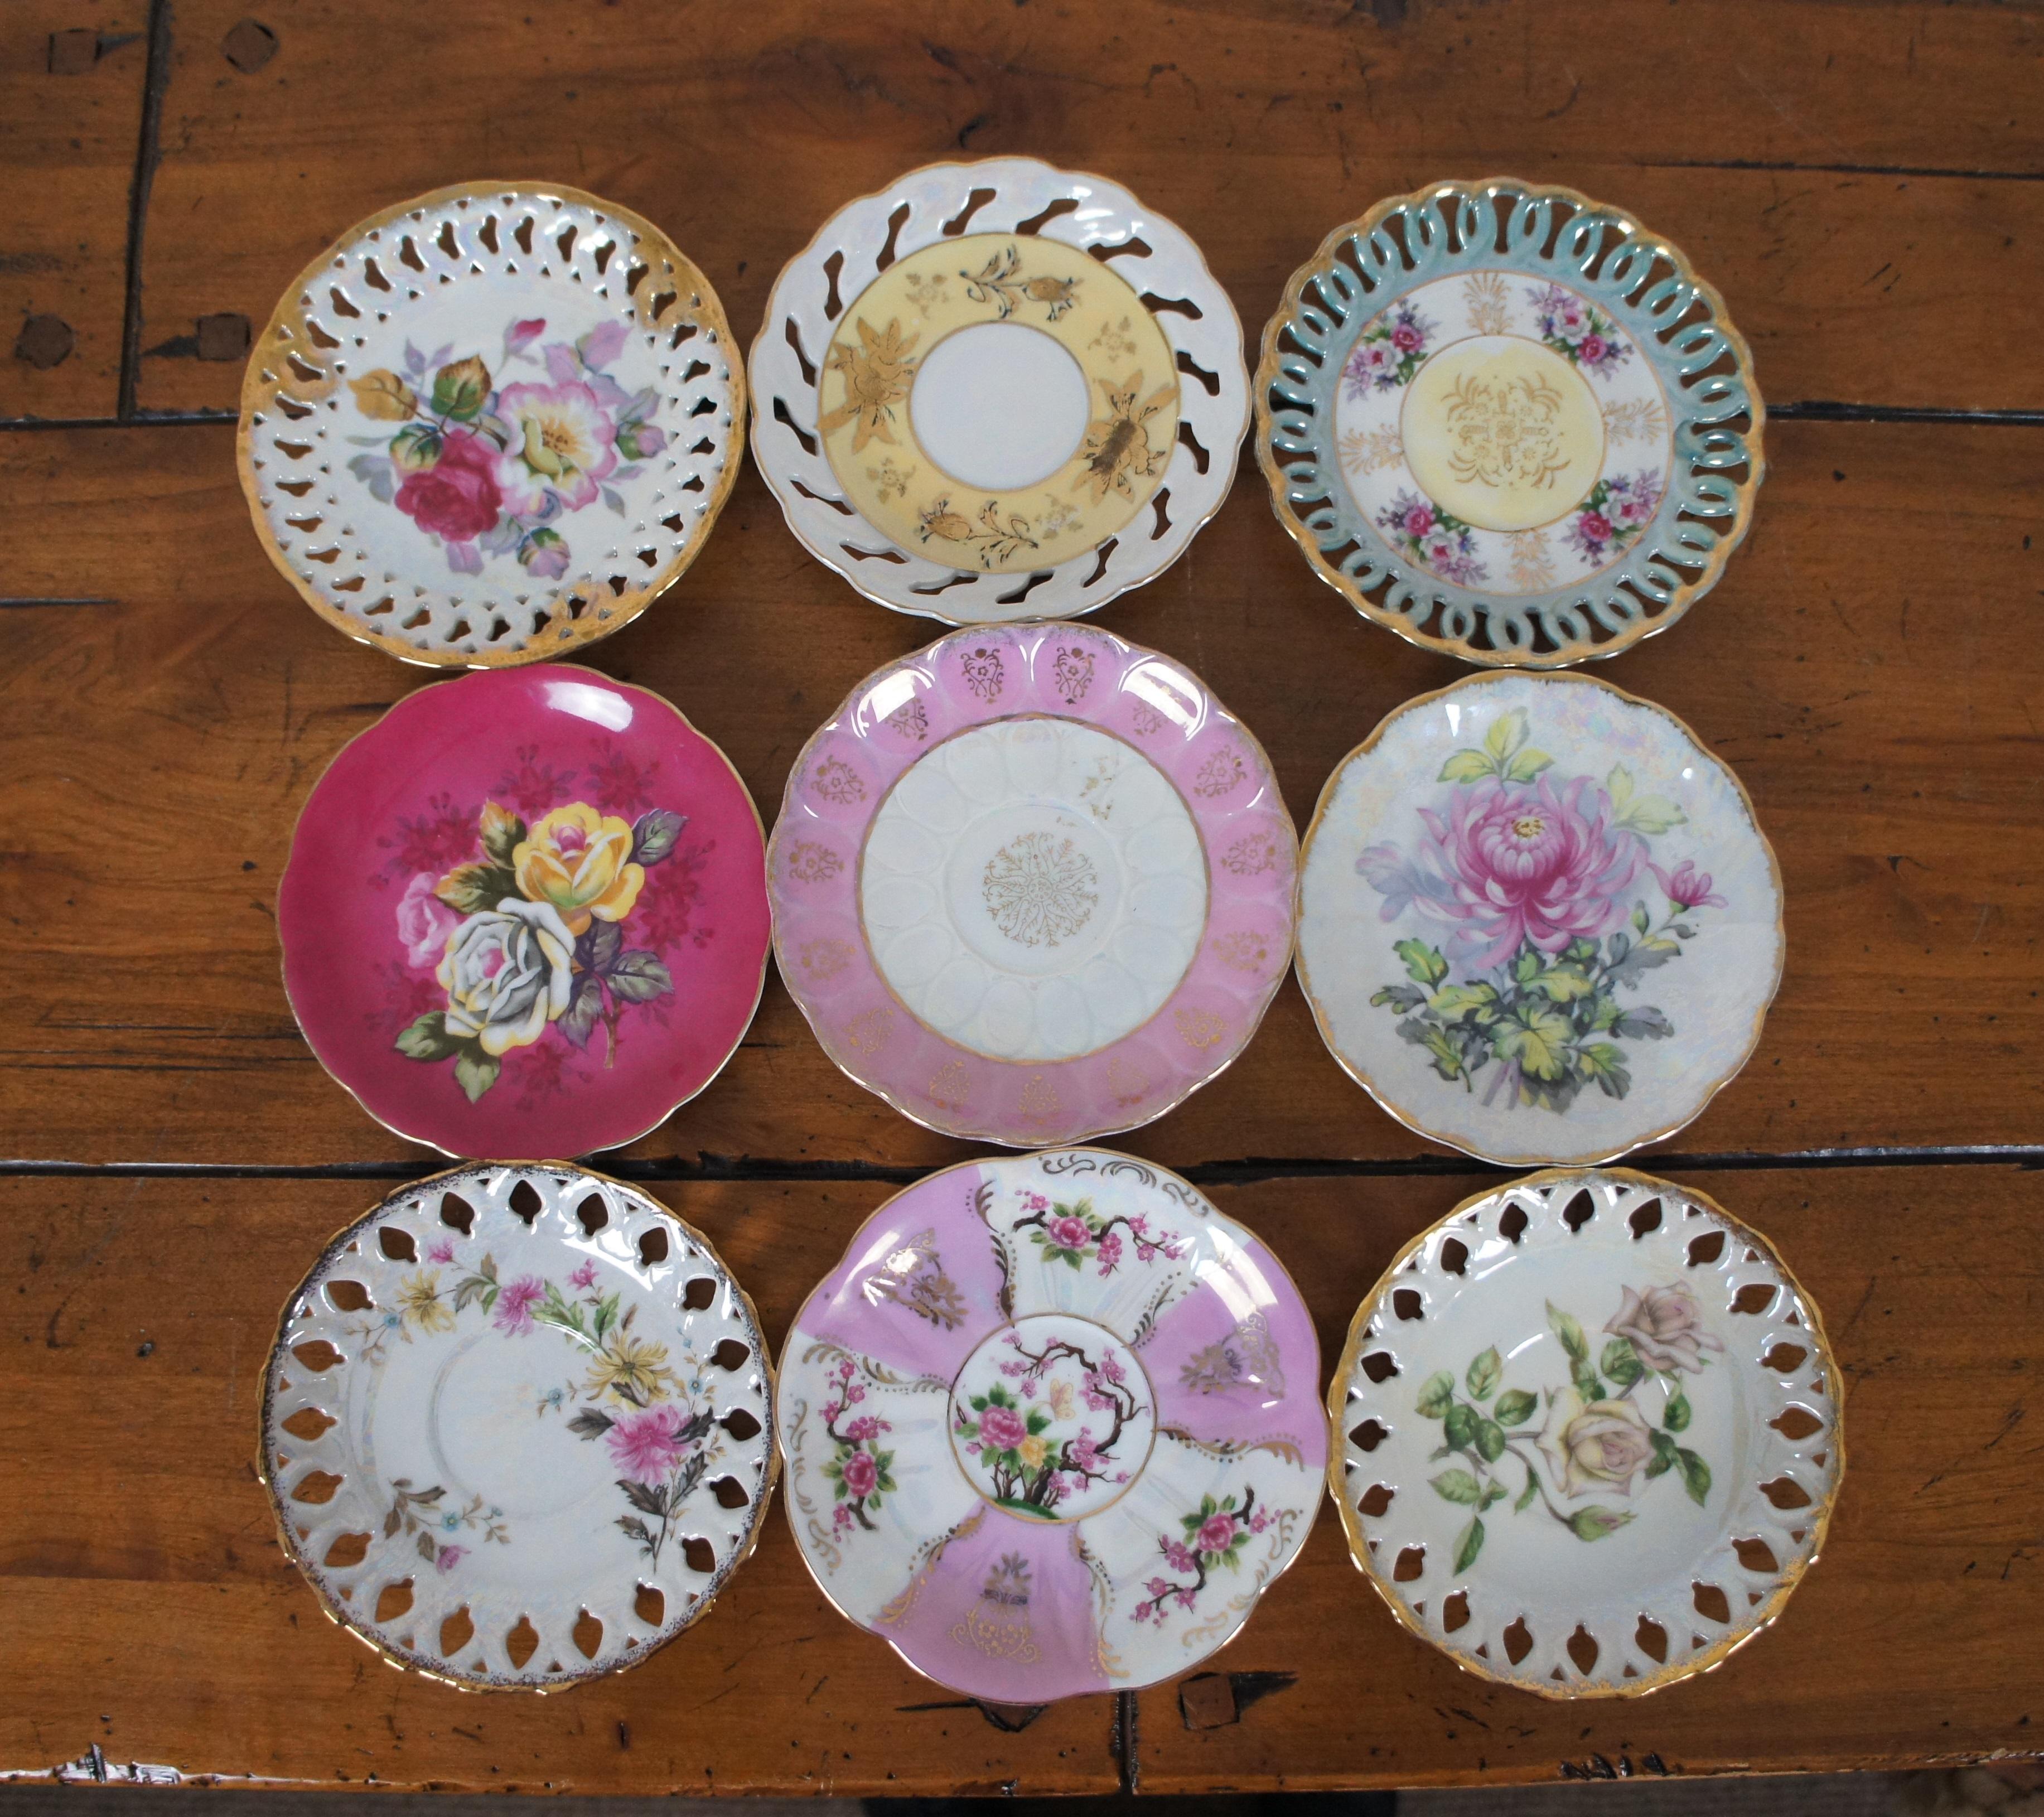 Lot of 9 Antique & Vintage Porcelain Teacups & Saucers Hand Painted Reticulated 1